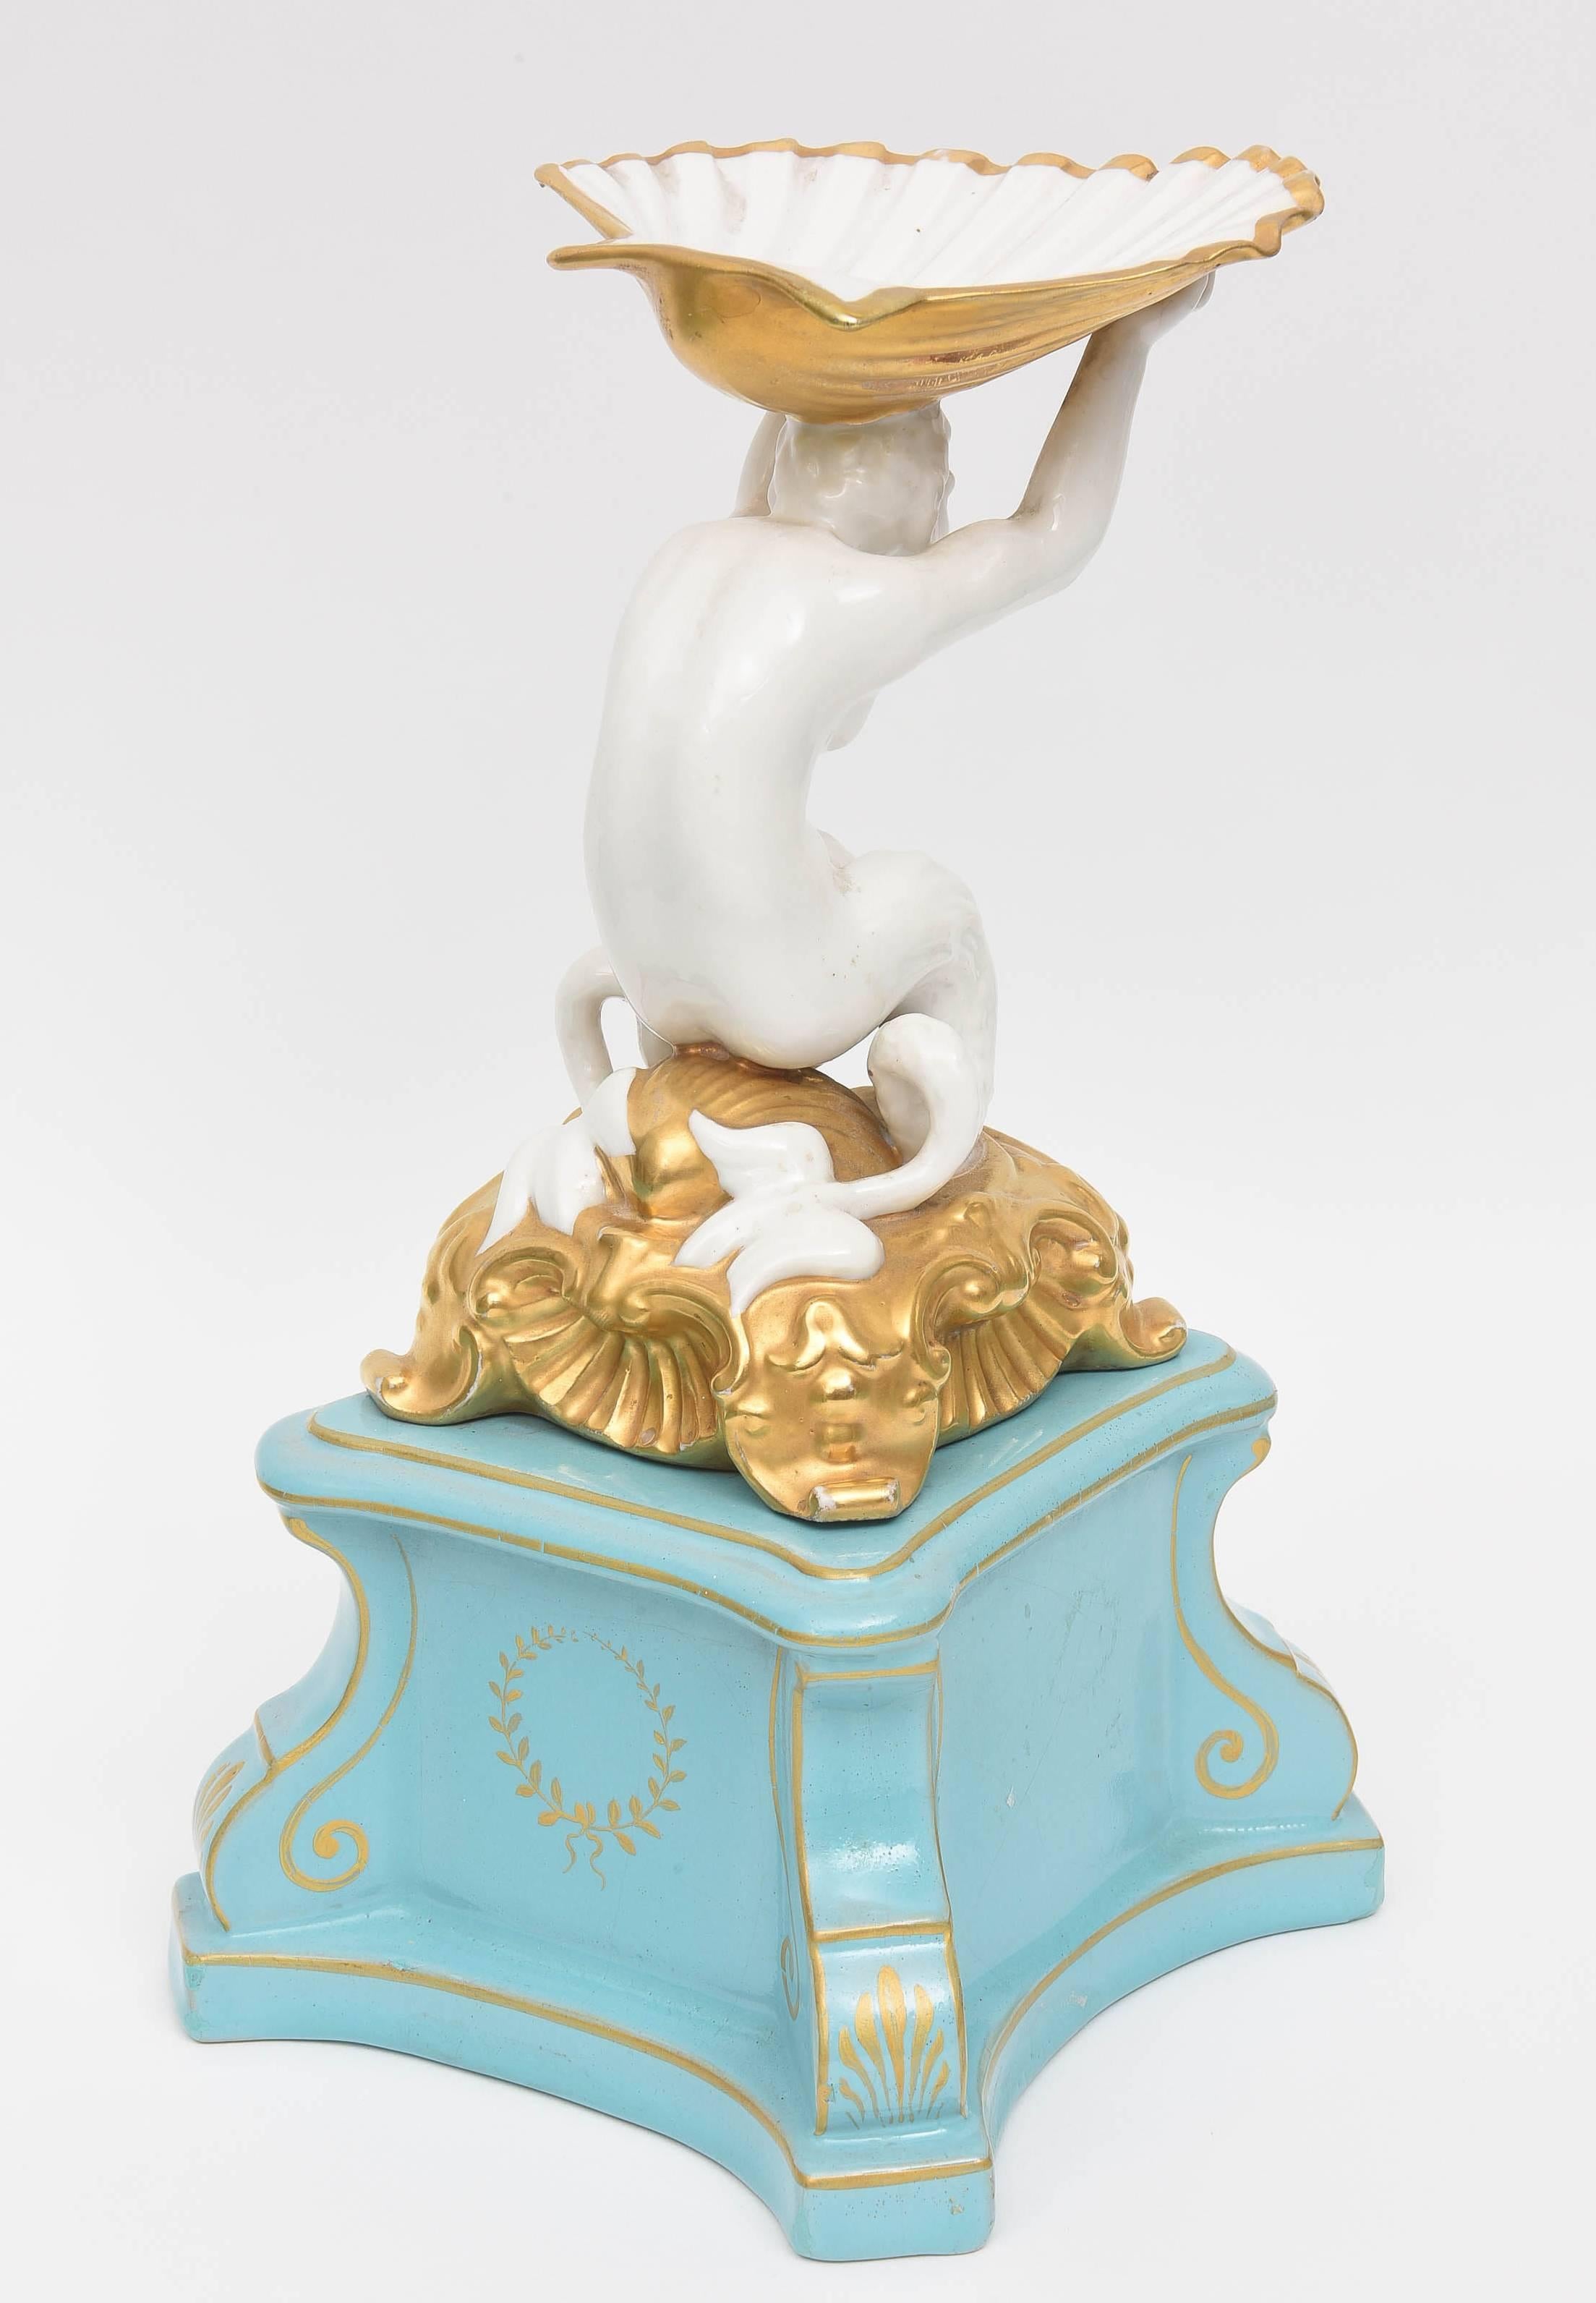 Gold Antique Porcelain Centerpiece, 8 Pieces by Ginori, Italy Figural Shell Turquoise